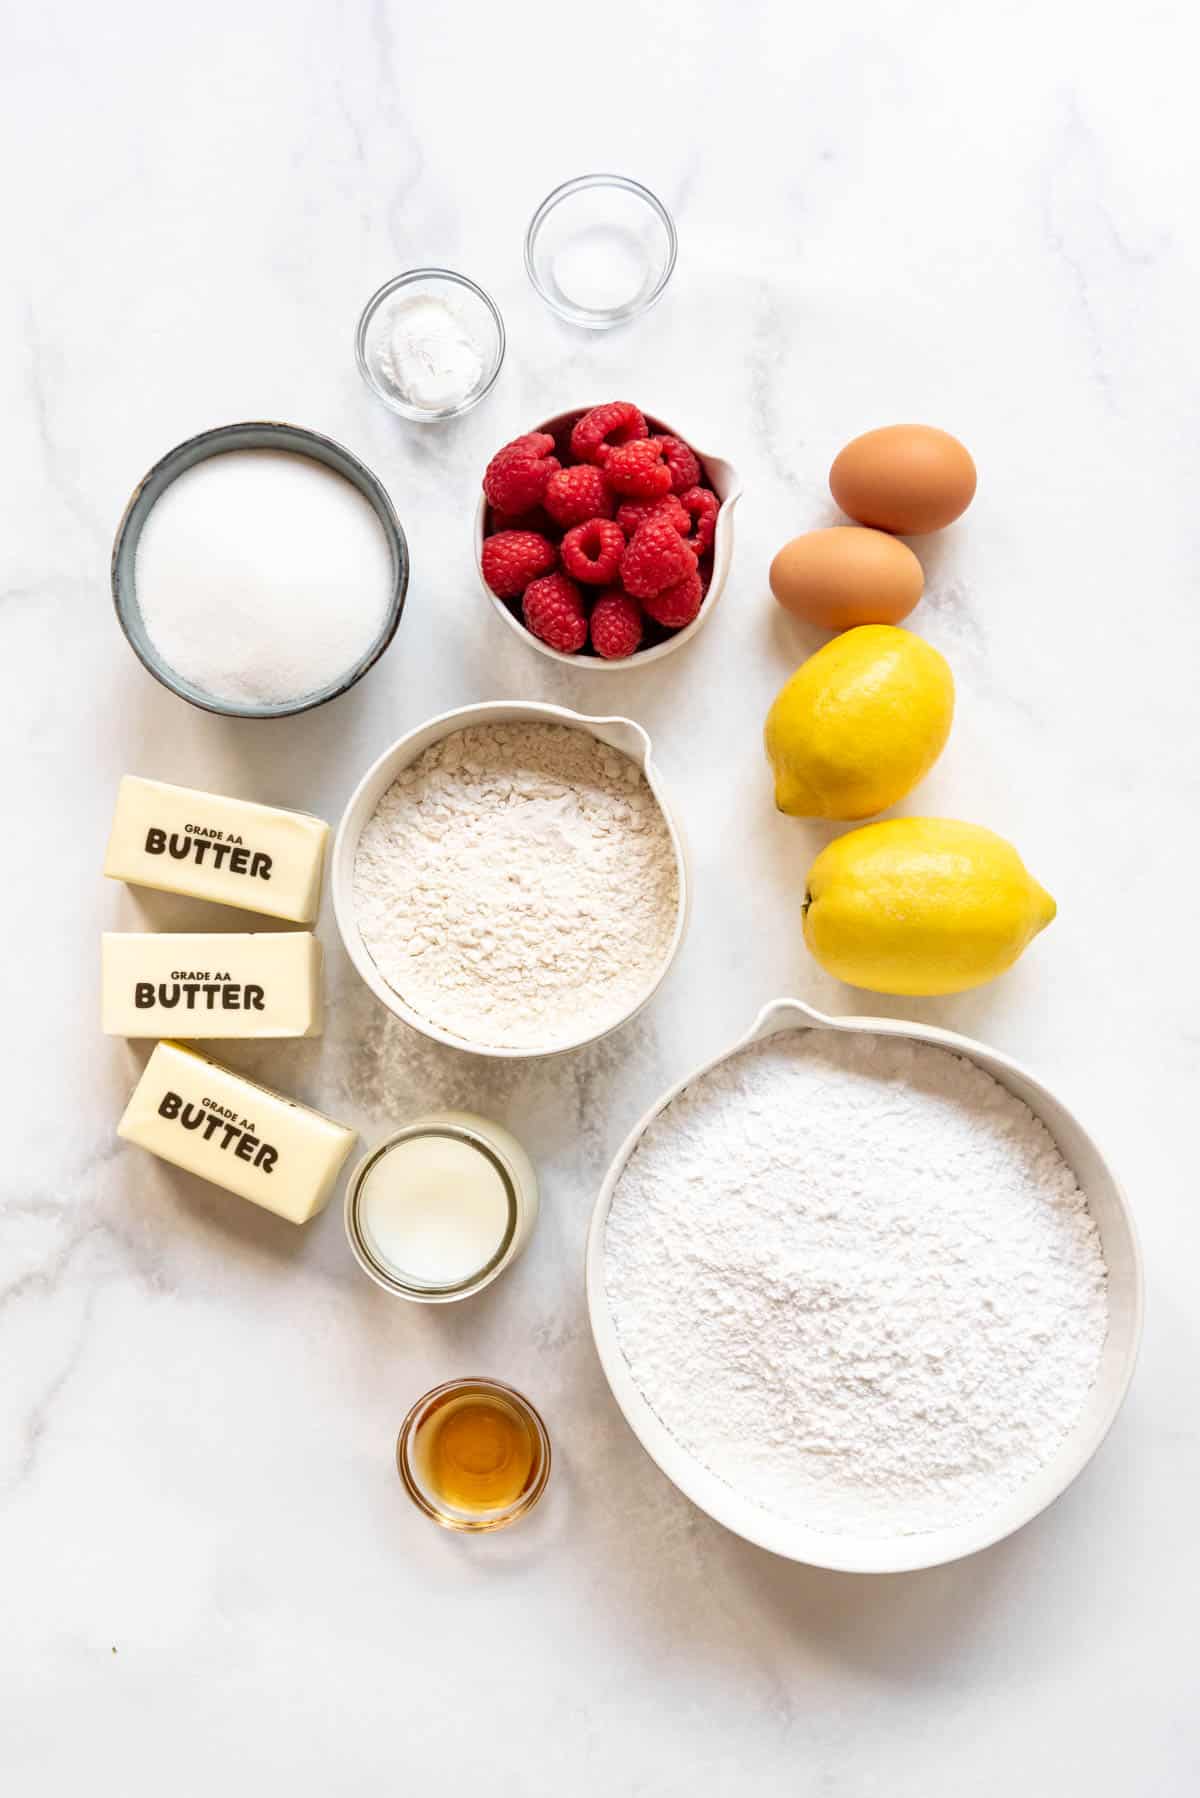 Top view of ingredients needed to make Raspberry Lemonade Cupcakes with raspberry buttercream frosting.